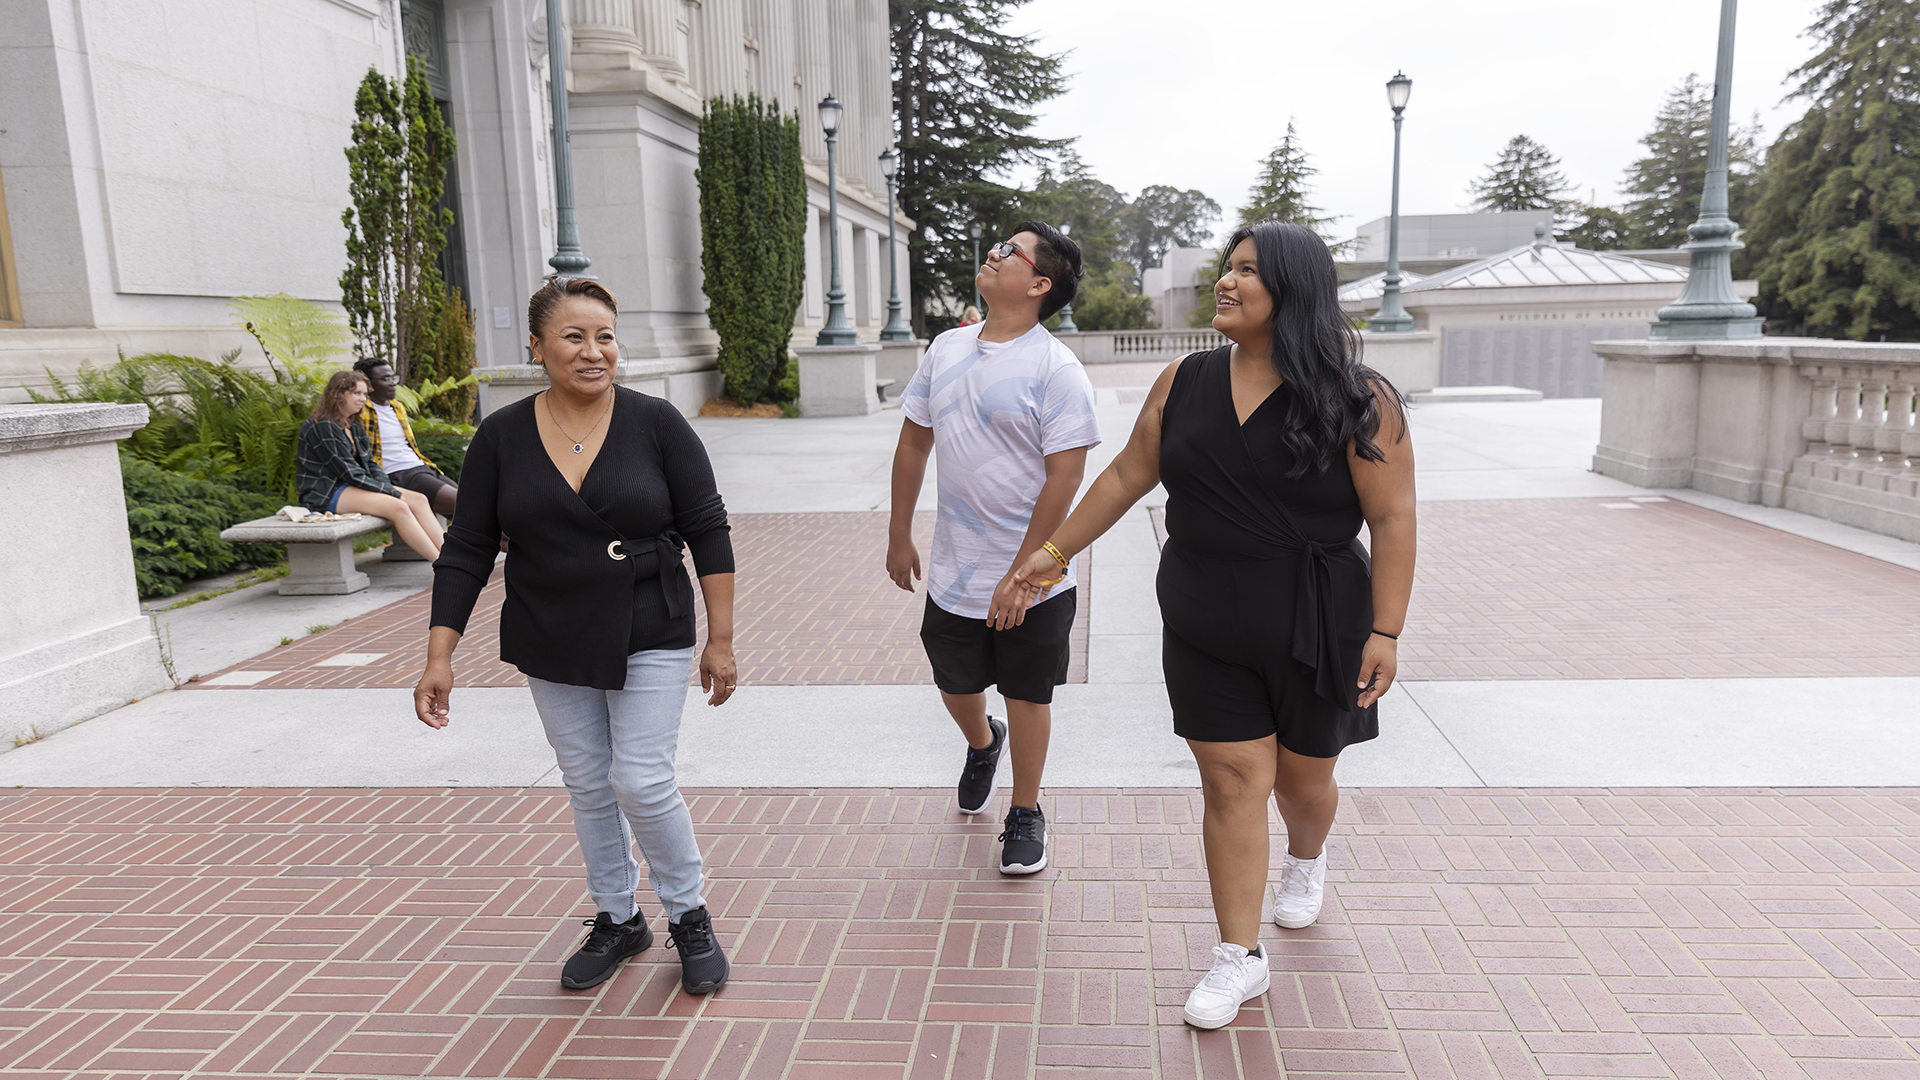 First-year UC Berkeley student Natalie walks on Berkeley's campus with her mom and younger brother.